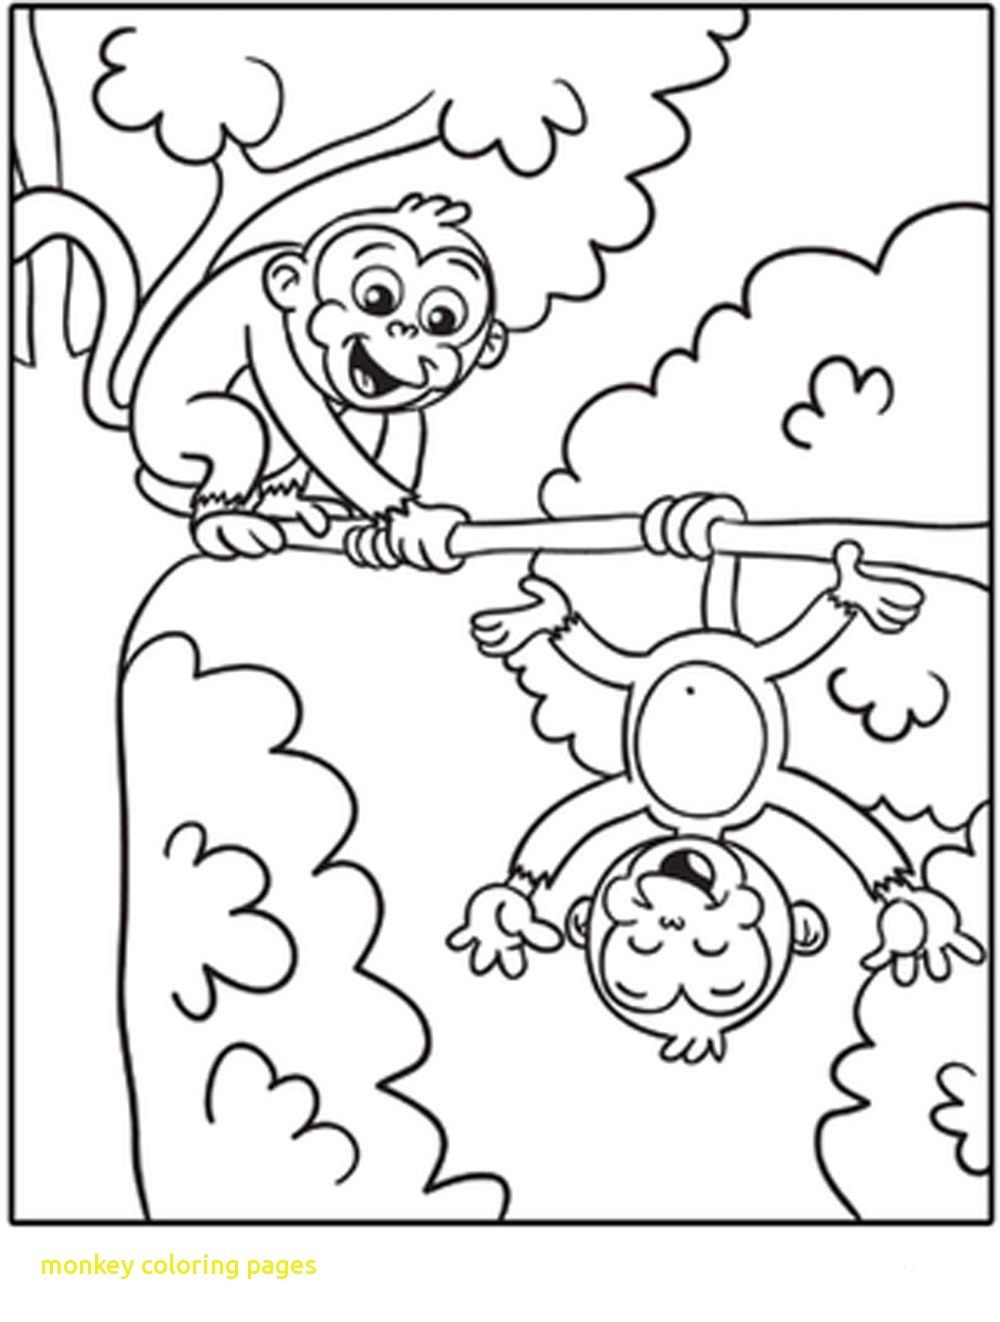 Monkey Coloring Pages 4 #29452 - Free Printable Monkey Coloring Sheets